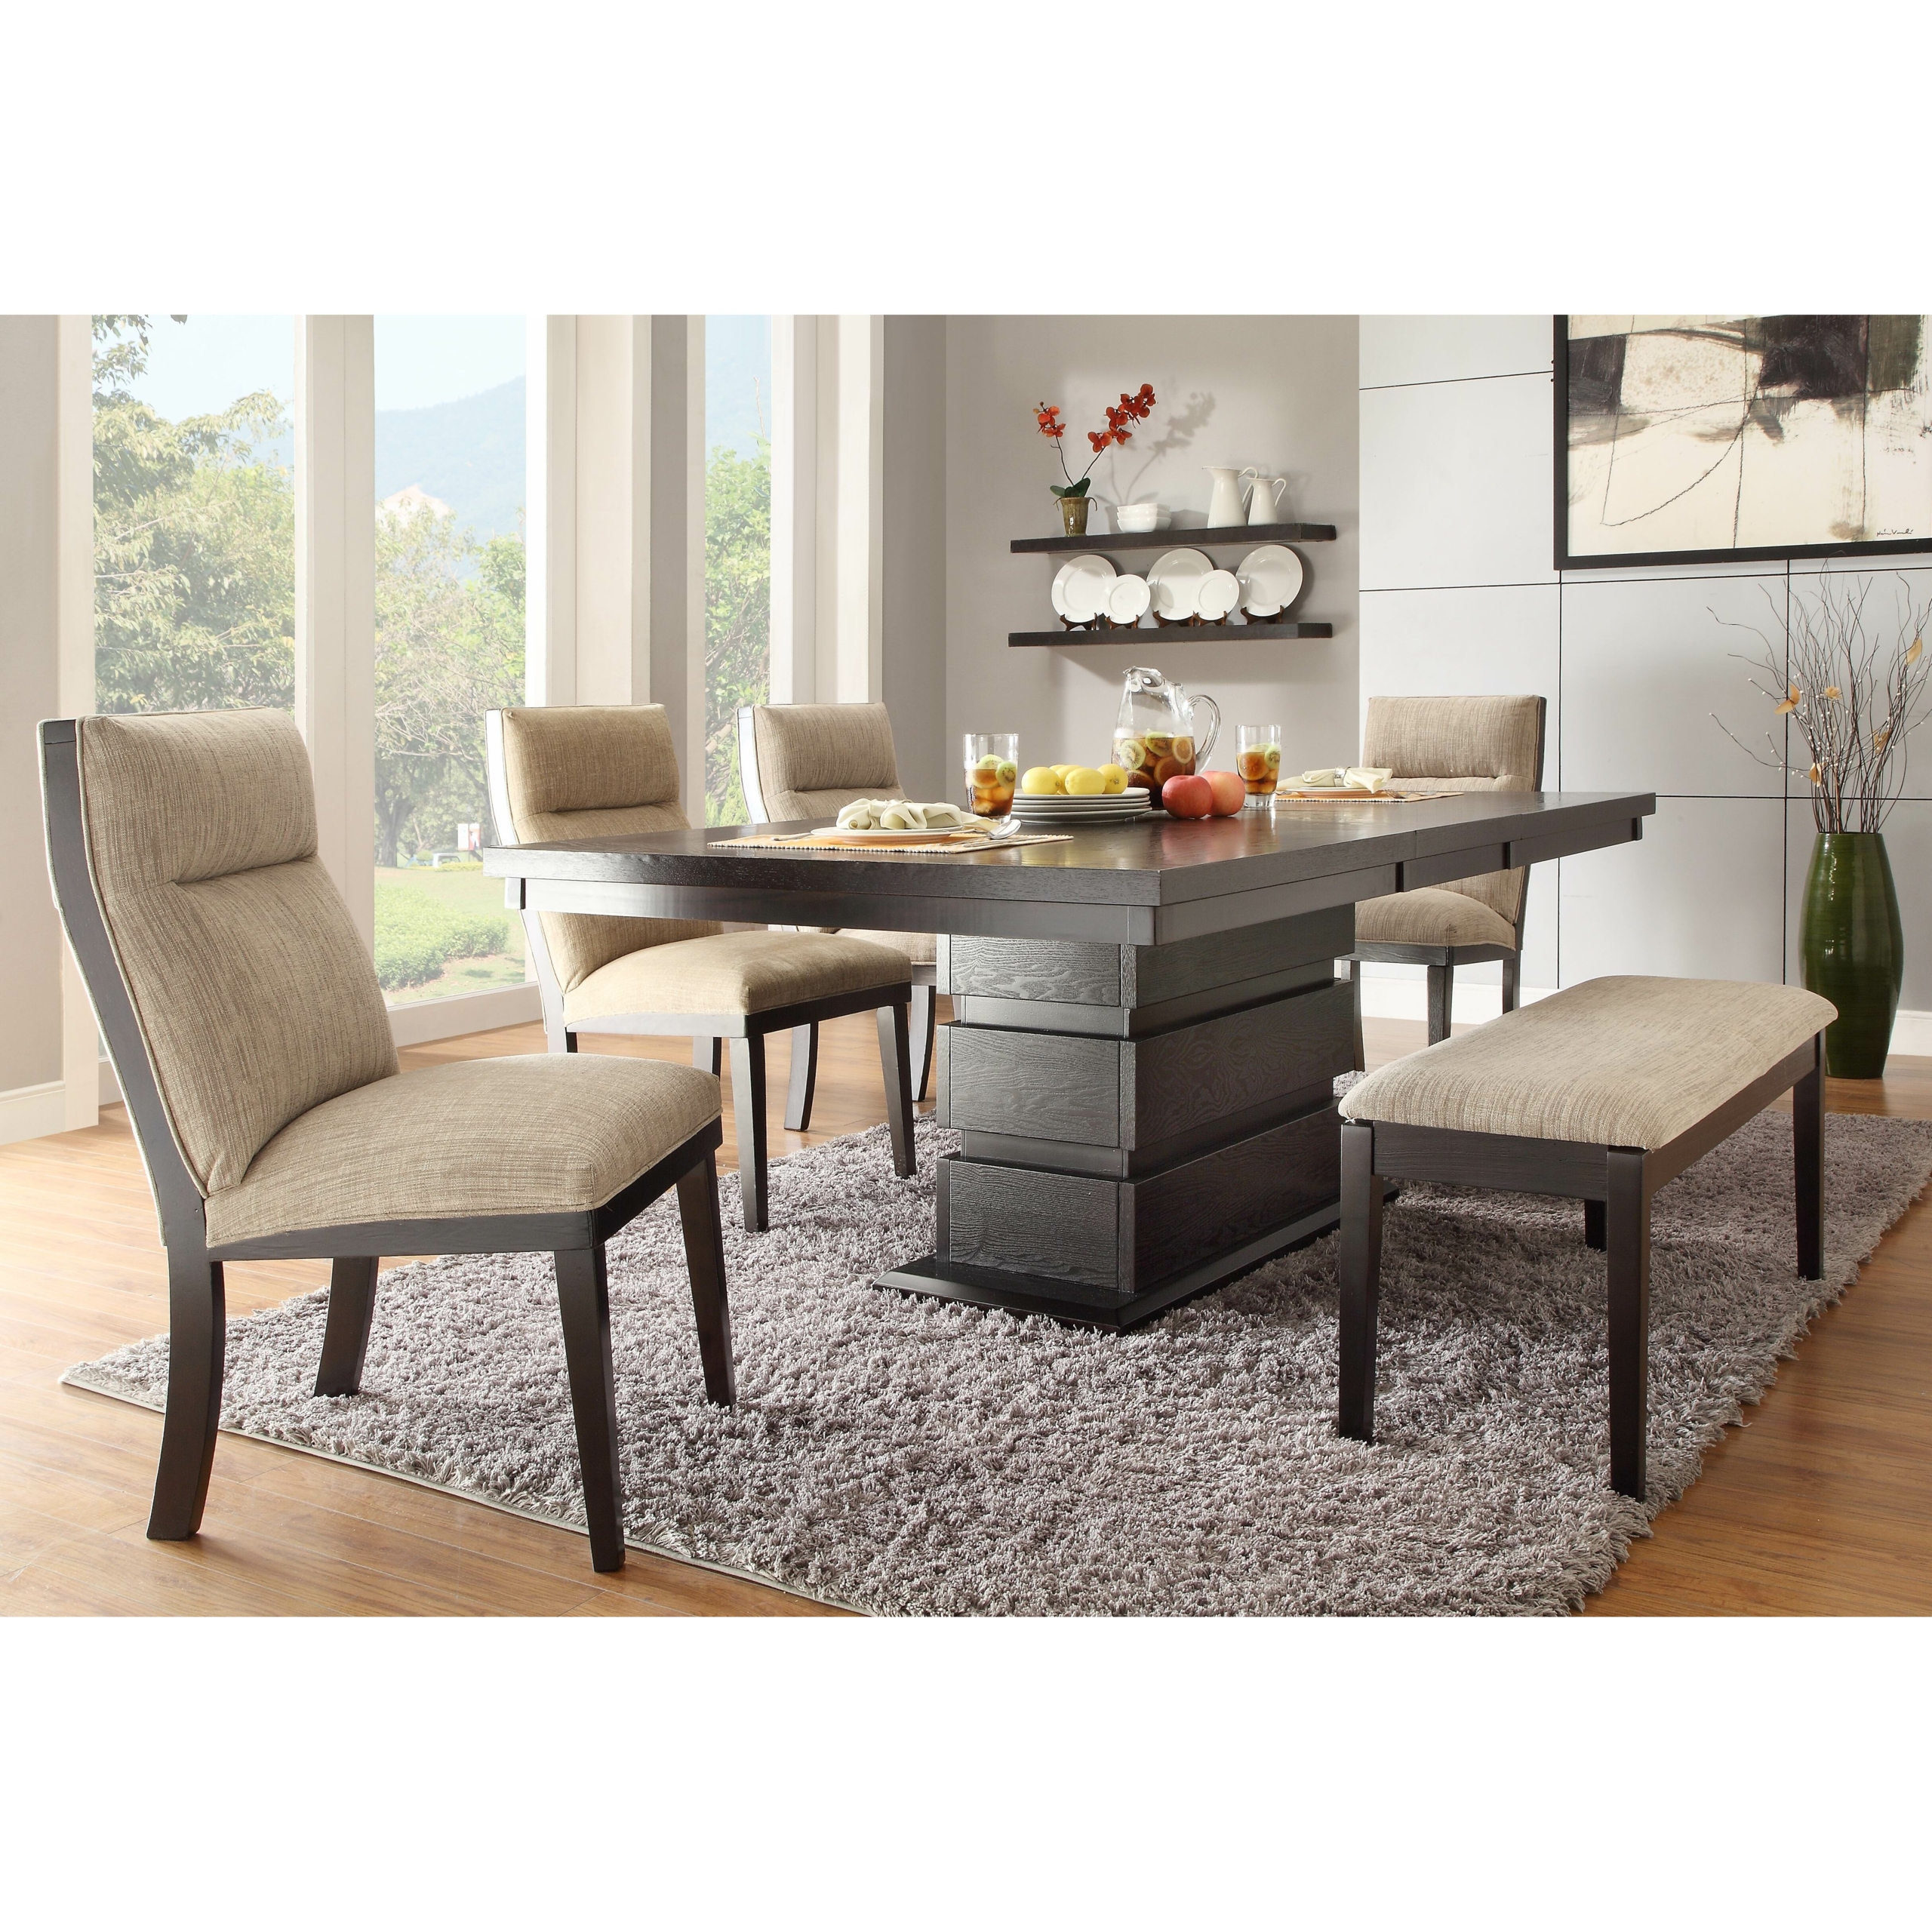 Dining Table With Bench You Ll Love In, Dining Room Table With Upholstered Chairs And Bench